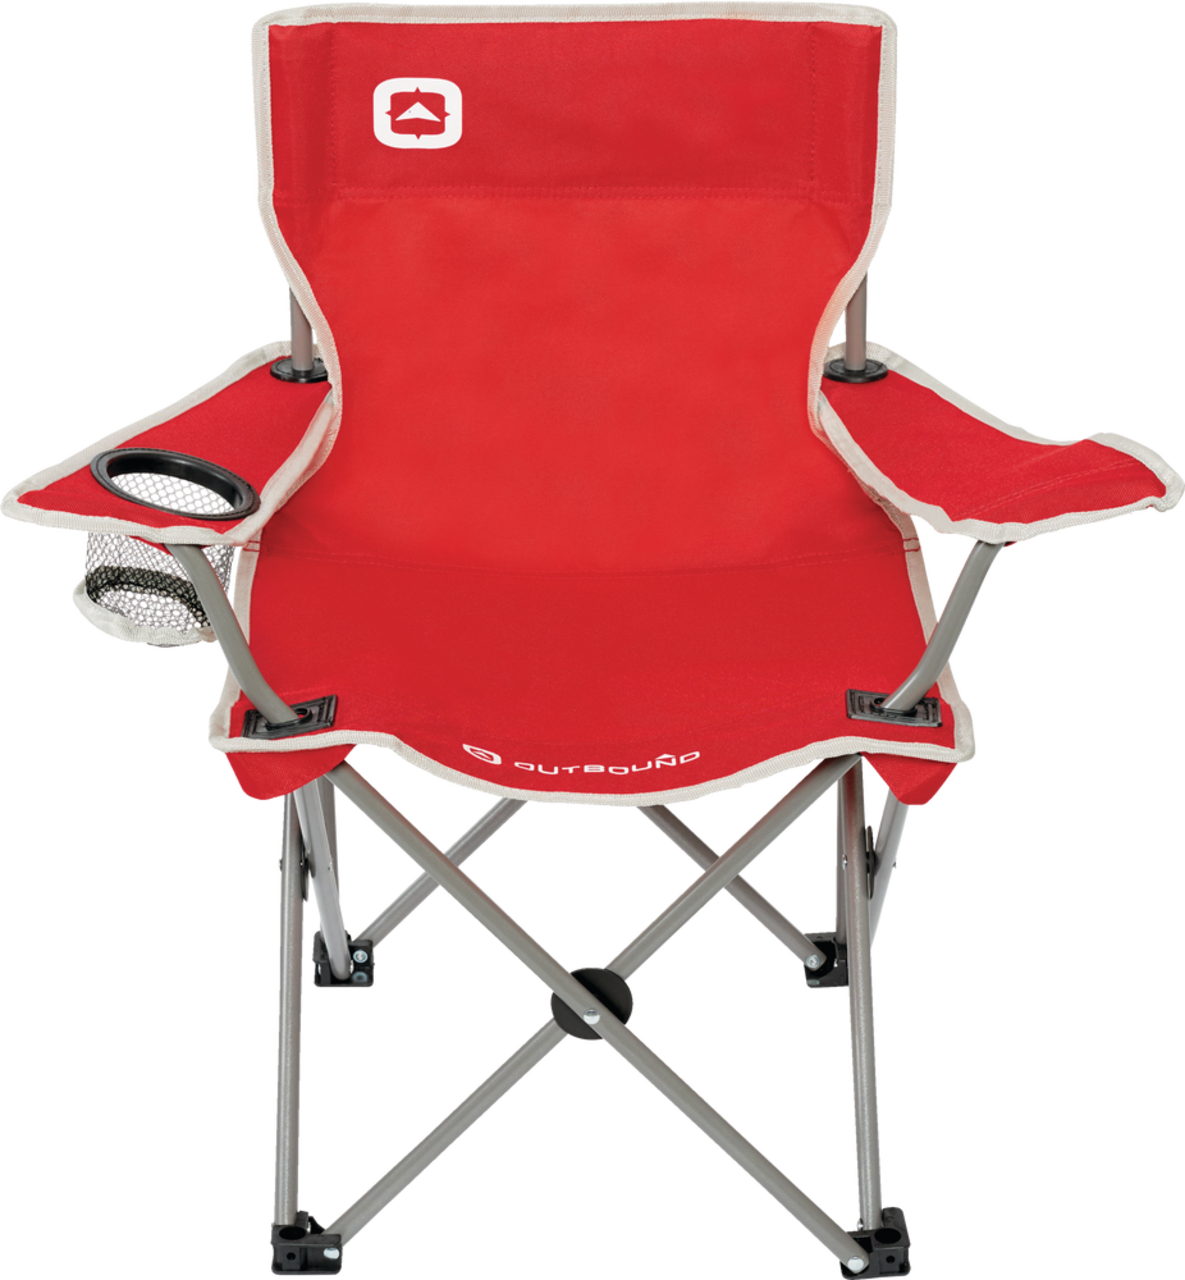 Outbound Kids' Mesh Back Folding Camping Quad Chair w/ Cup Holder & Child  Safety Lock, Assorted